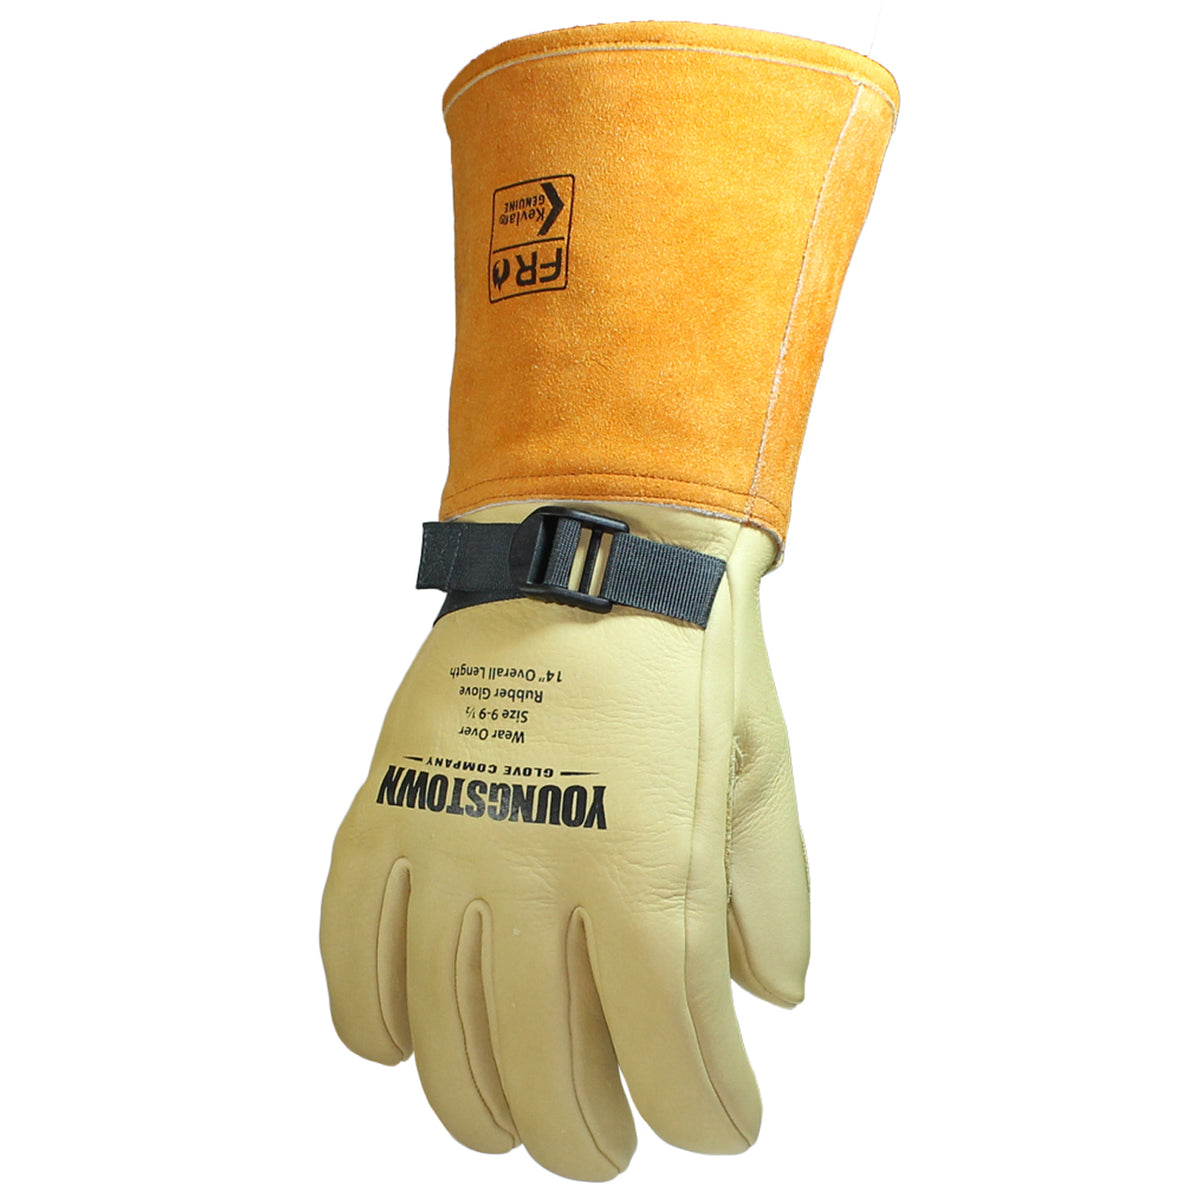 Safety Gloves Construction, Gloves Work Resistant Rubber